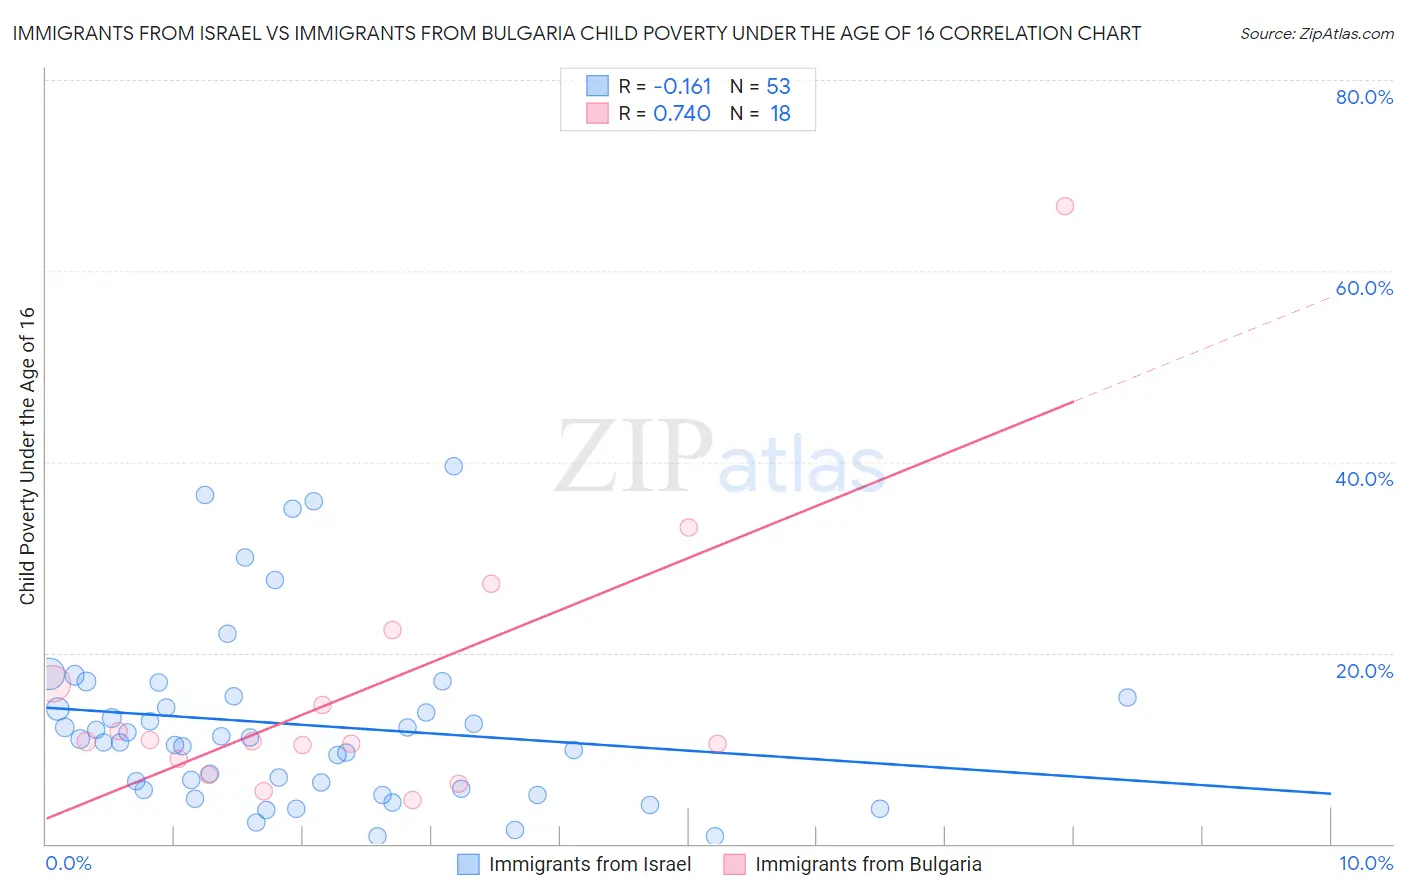 Immigrants from Israel vs Immigrants from Bulgaria Child Poverty Under the Age of 16